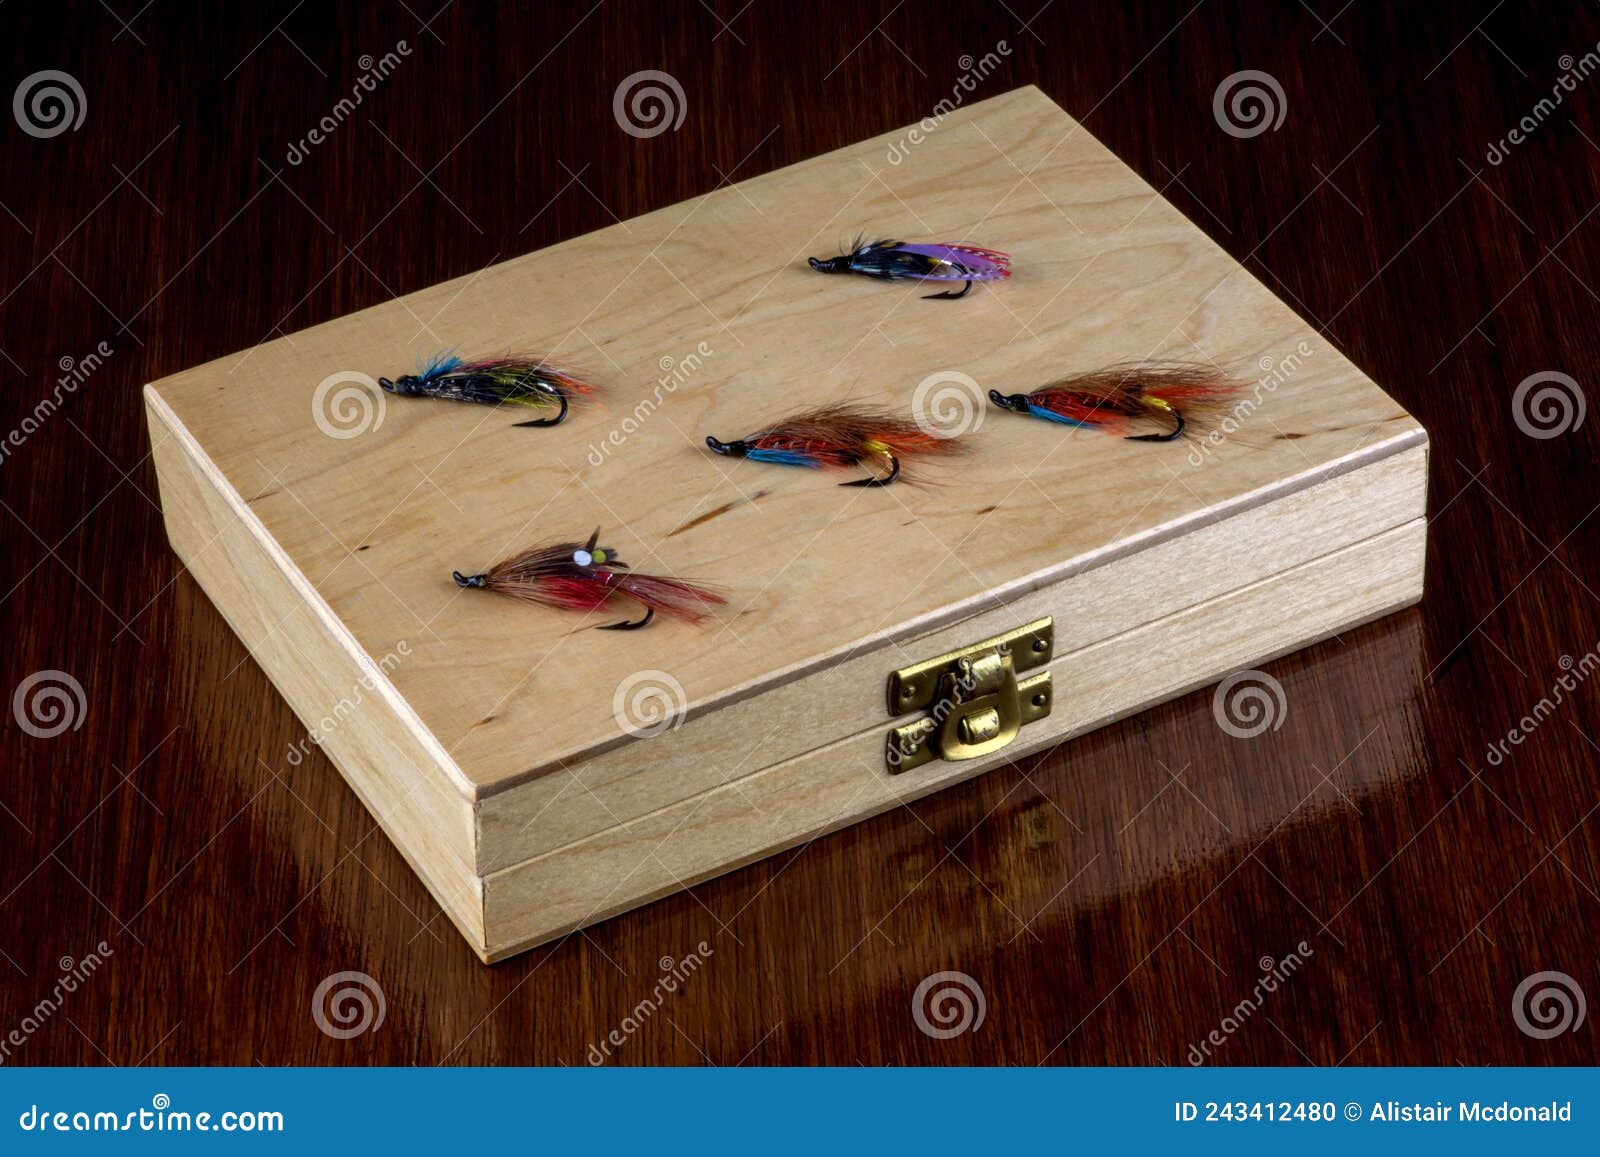 Old Wooden Fishing Fly Box with Salmon Flies on a Wooden Table Top